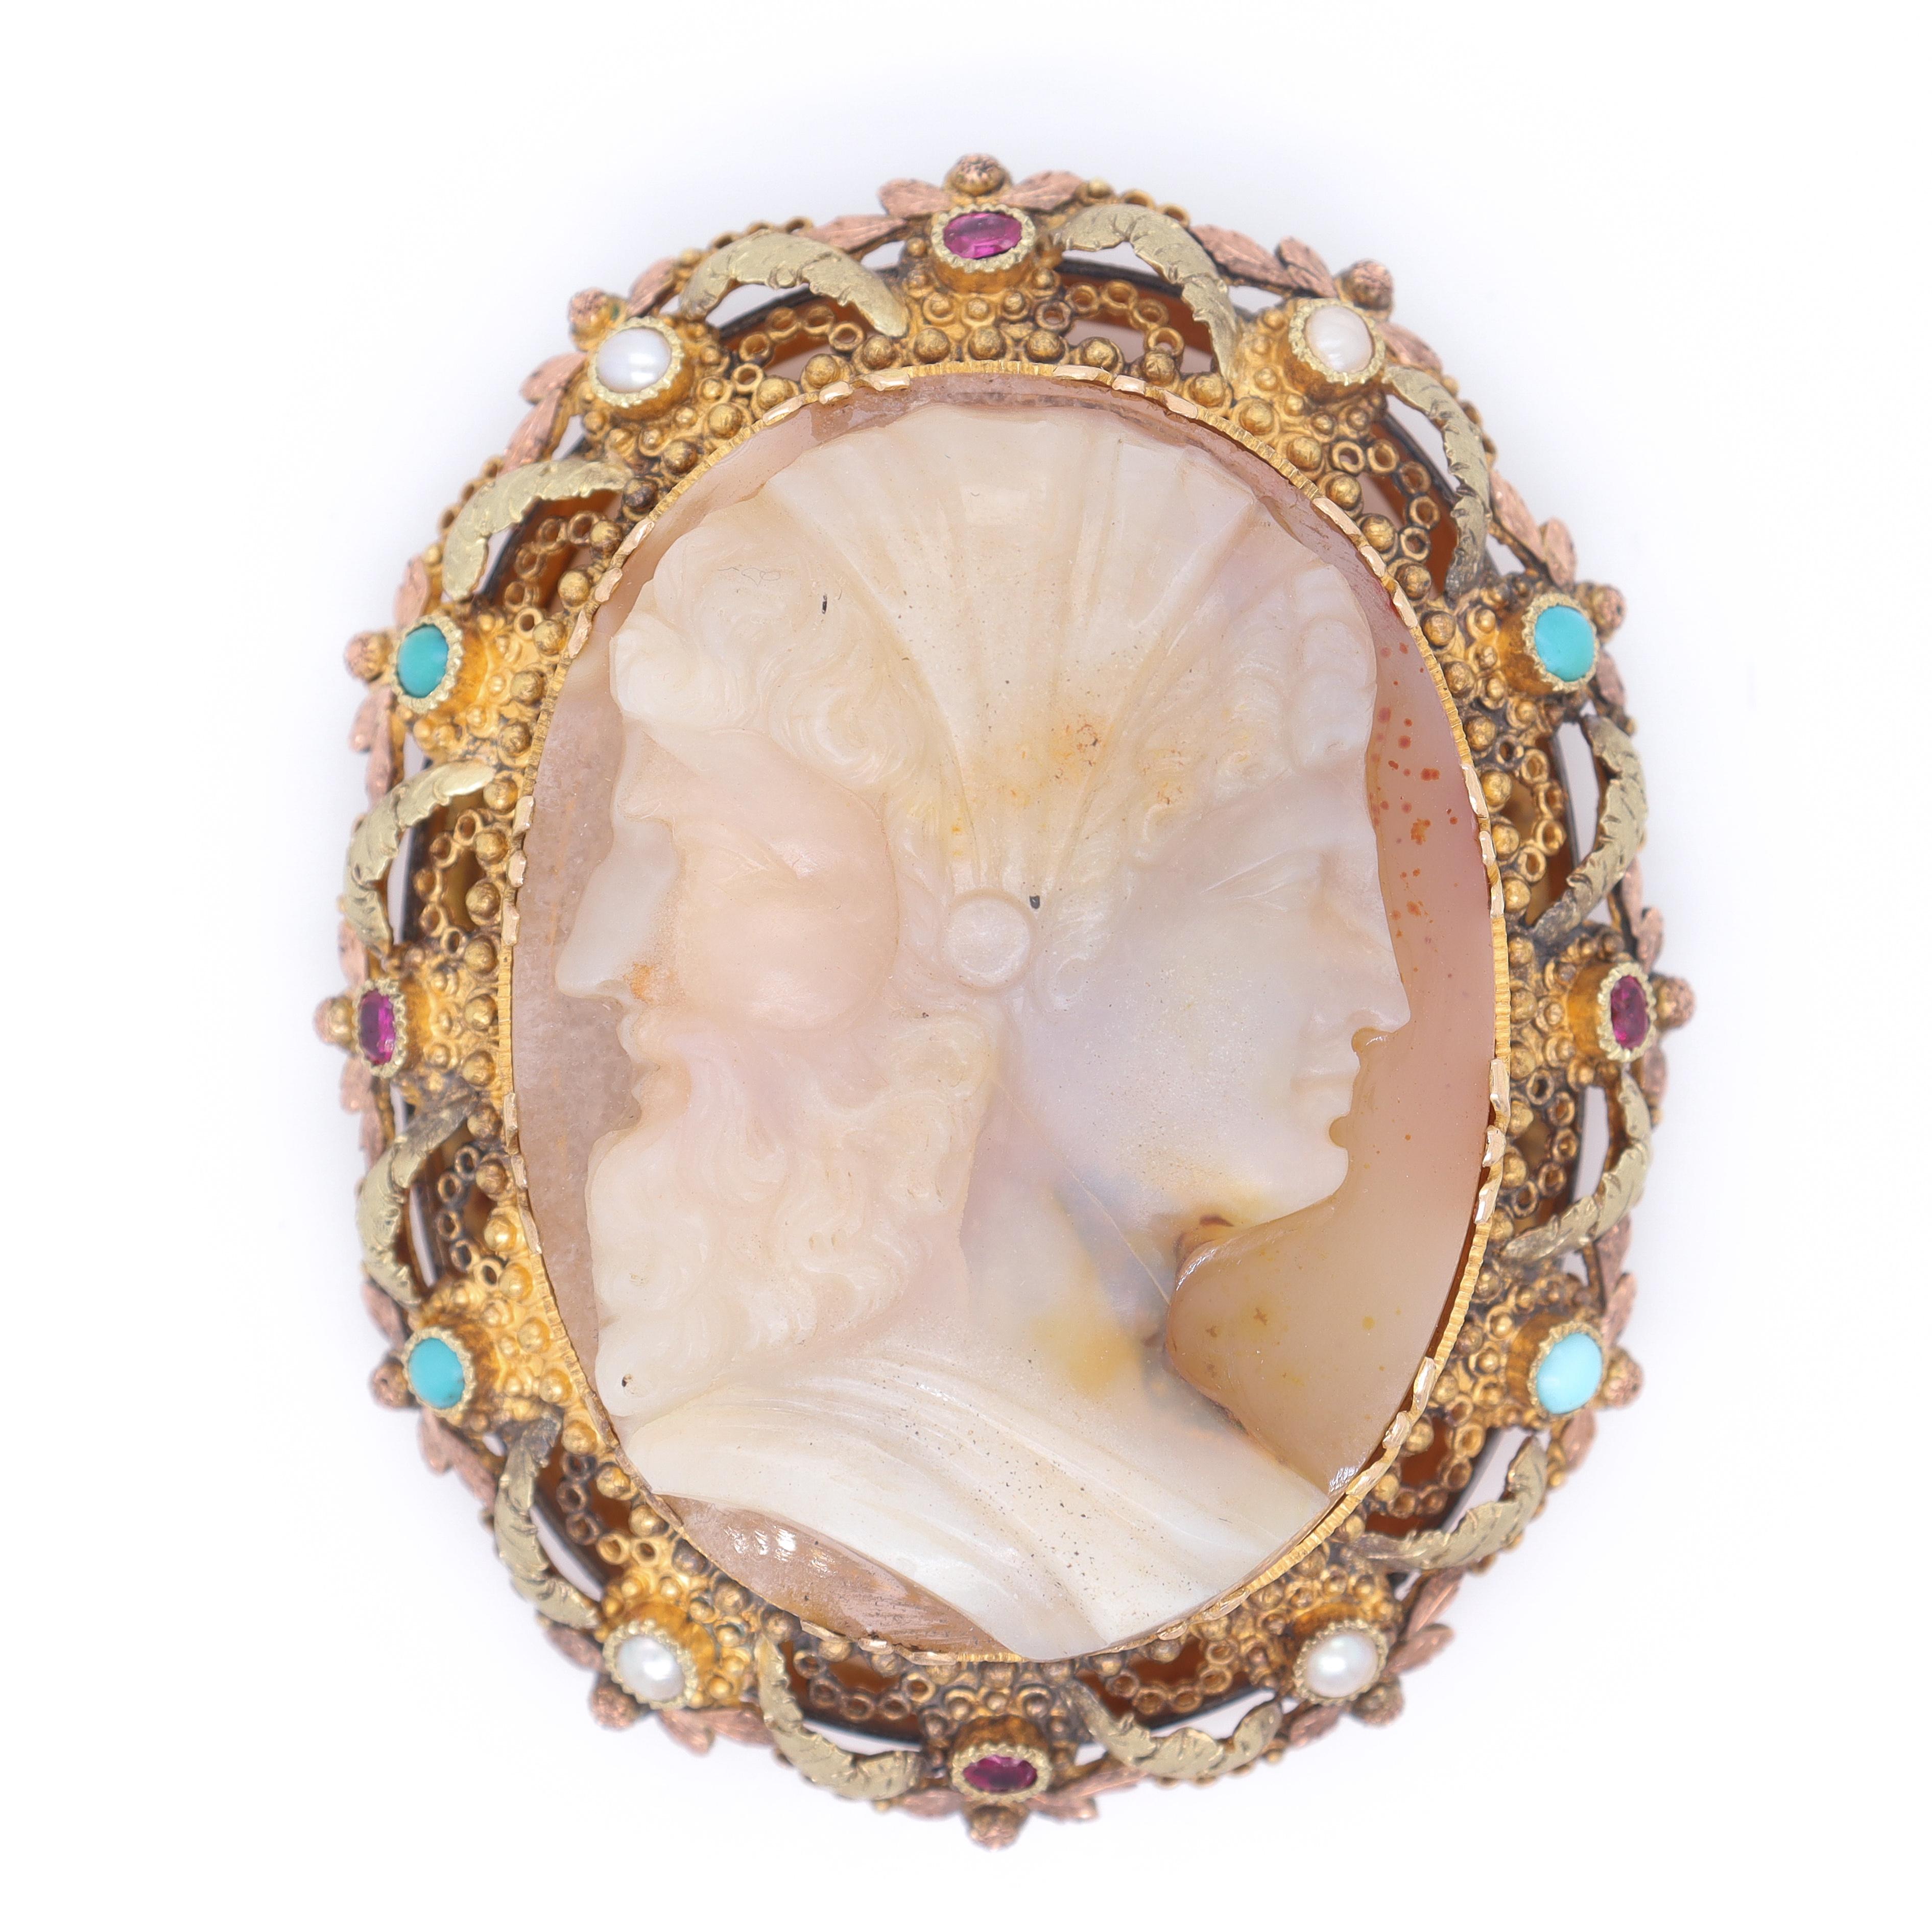 A very fine antique Victorian gold and carved agate or hard stone cameo clasp for a multi-strand bracelet or necklace.

In rose, yellow, and green golds. 

The cameo depicts a double profile of a hermaphroditic man and woman after the Antique. 

It